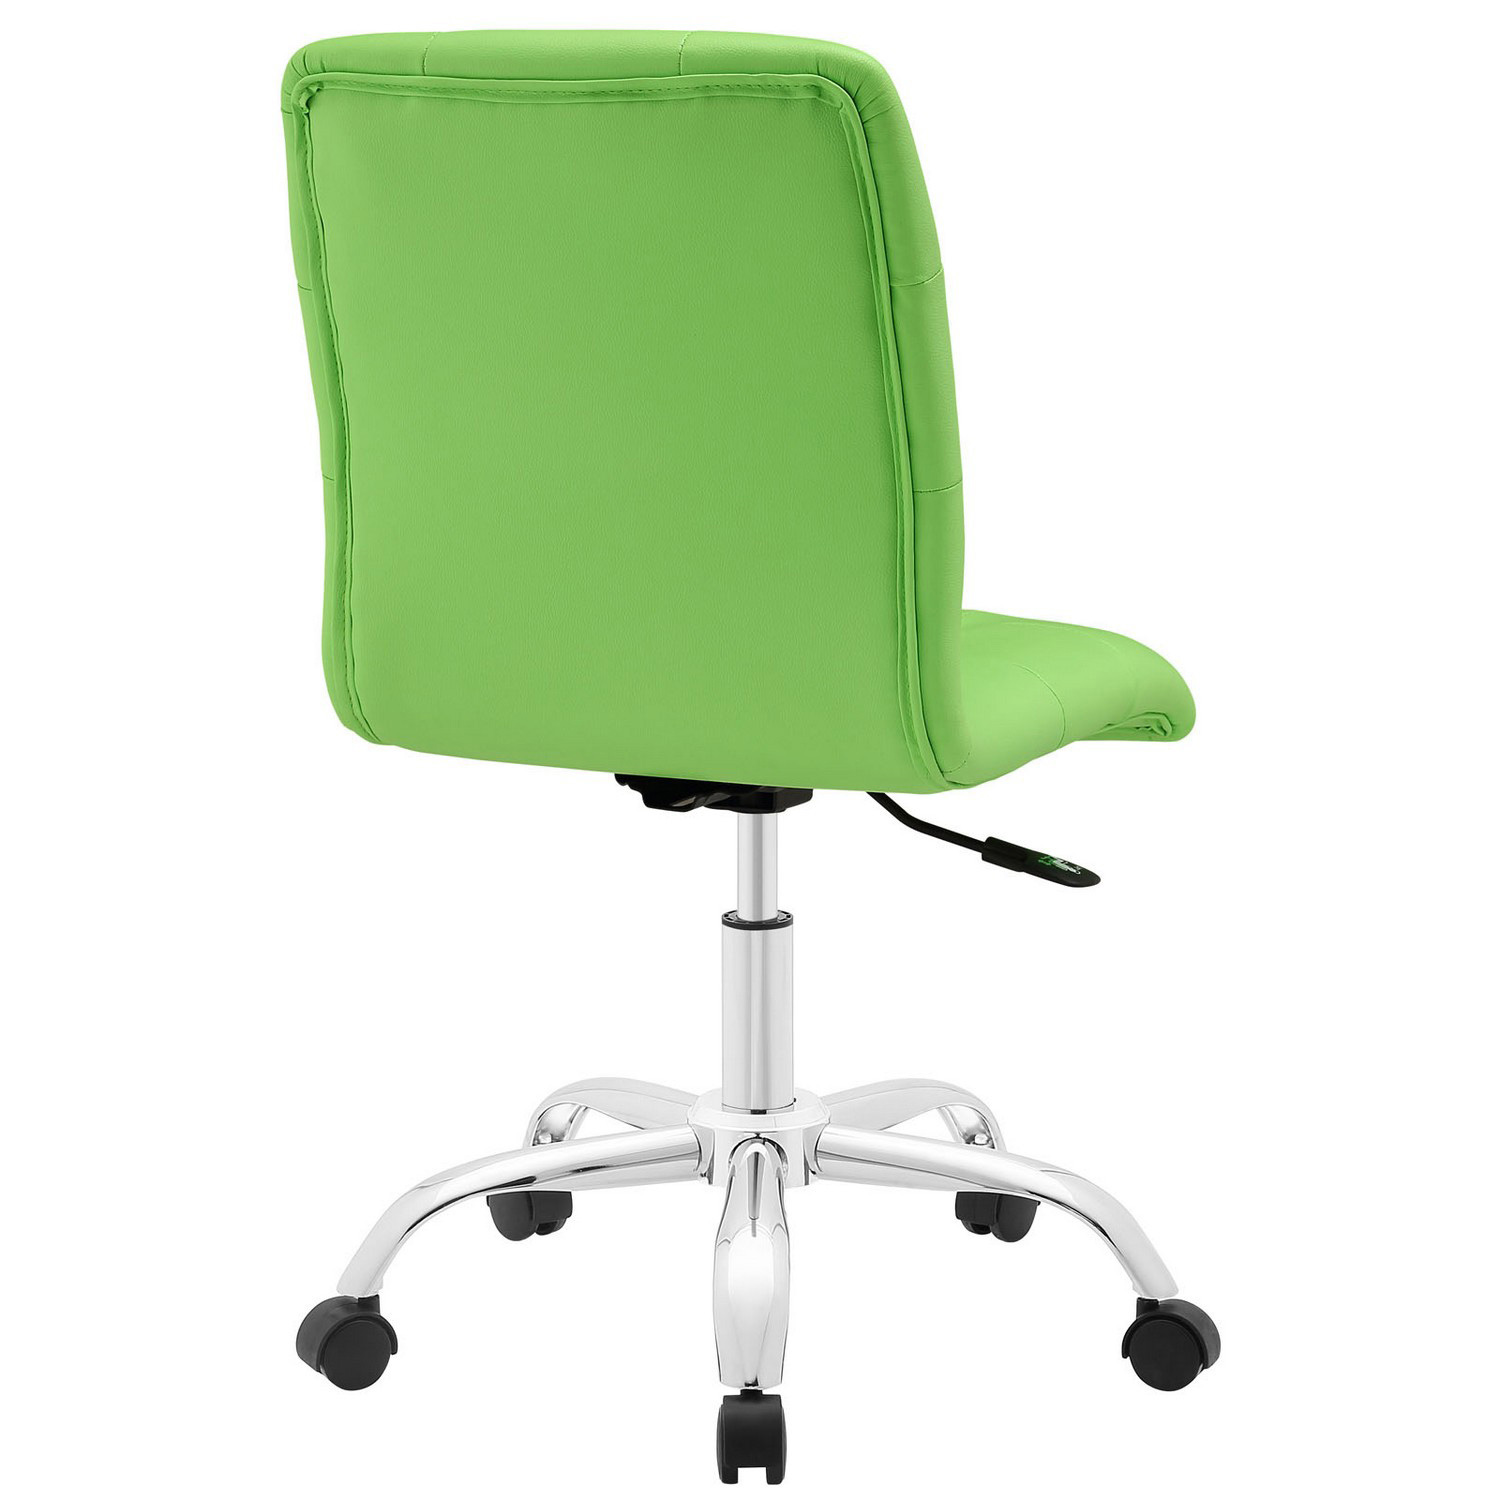 Modway Prim Armless Mid Back Office Chair - Bright Green